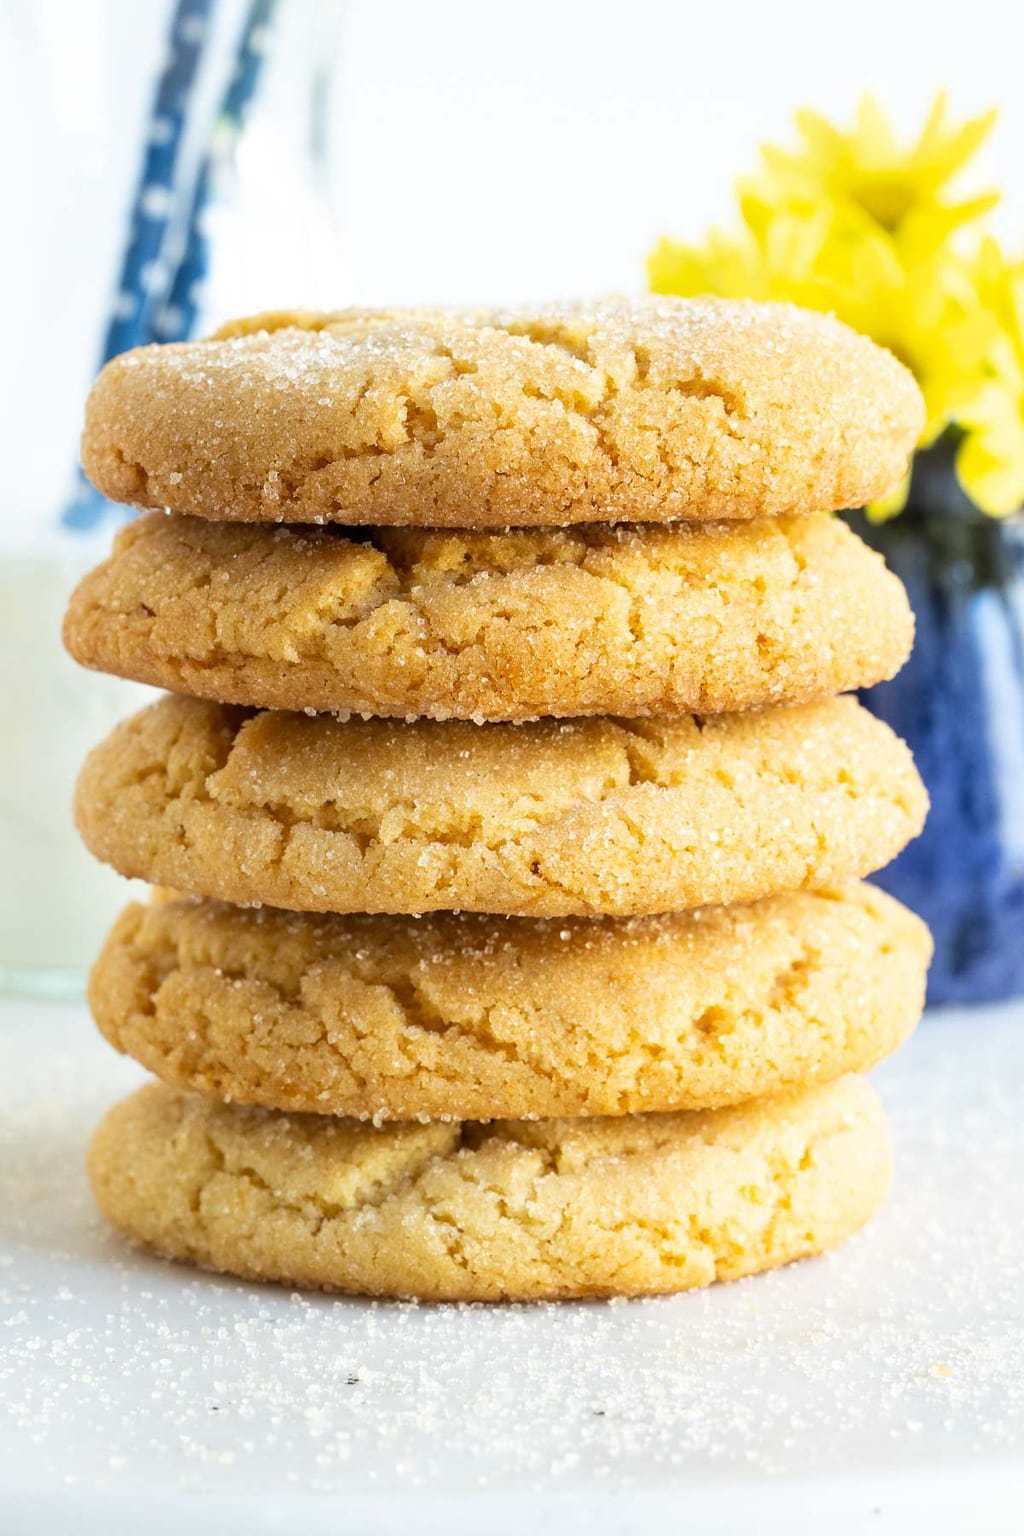 Vertical closeup photo of a stack of Crinkly Crackly Lemon Sugar Cookies on a white gloss surface.